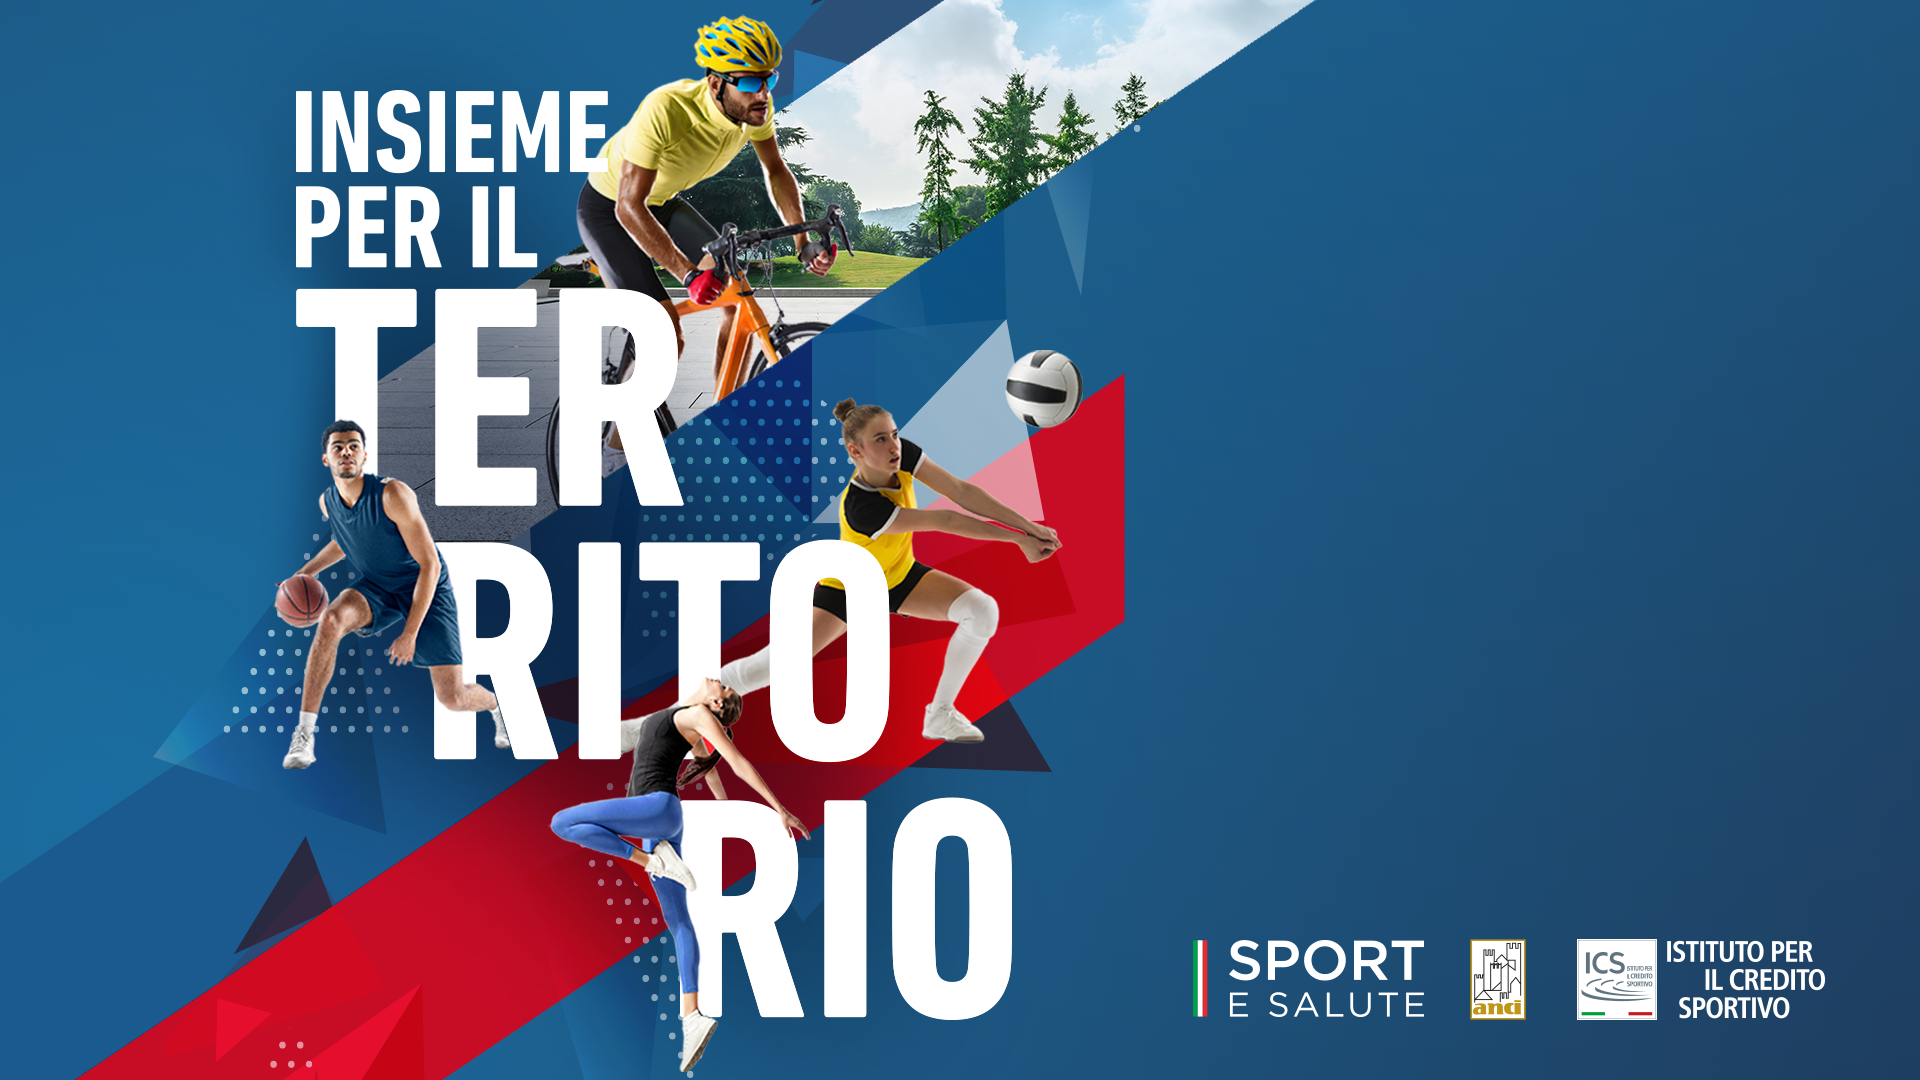 The cycle of events “Together for the territory” organized by Sport and Health, ANCI and the Institute for Sports Credit stops in Florence, Palmanova and Genoa